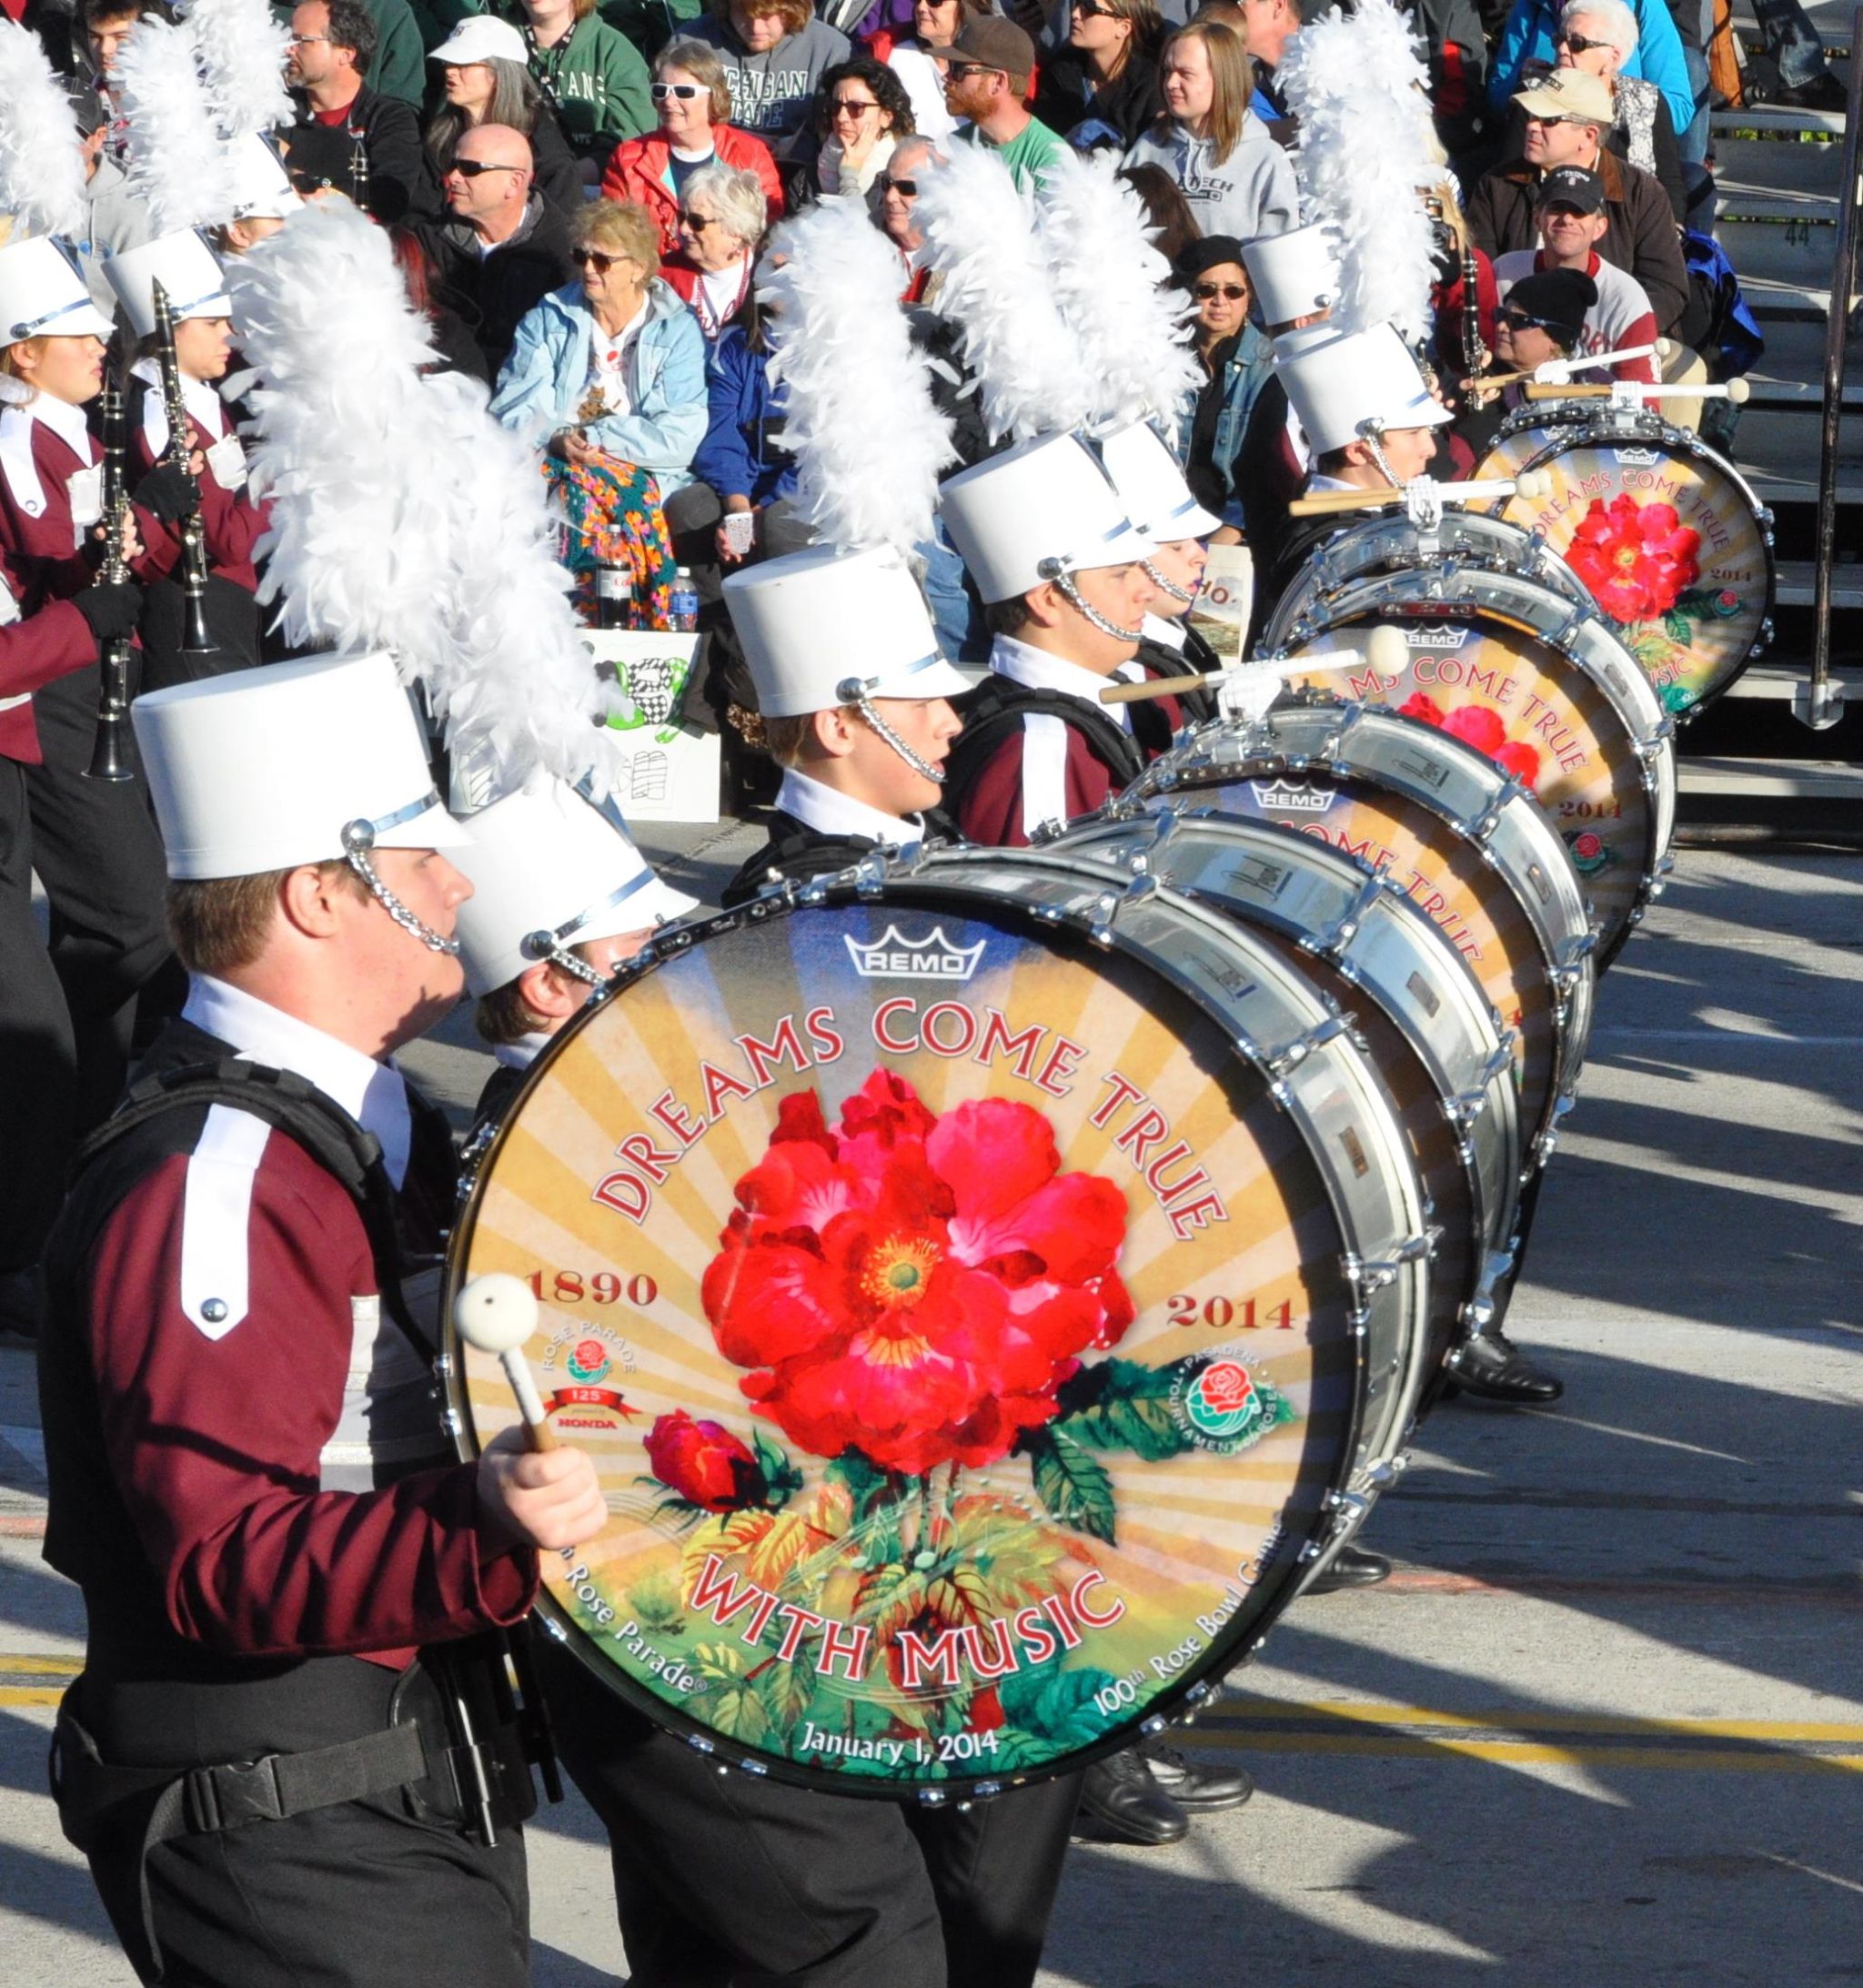 Dobyns-Bennett High School Marching Indiana Band (c), Tournament of Roses Parade, Pasadena, CA - 2014-01-01